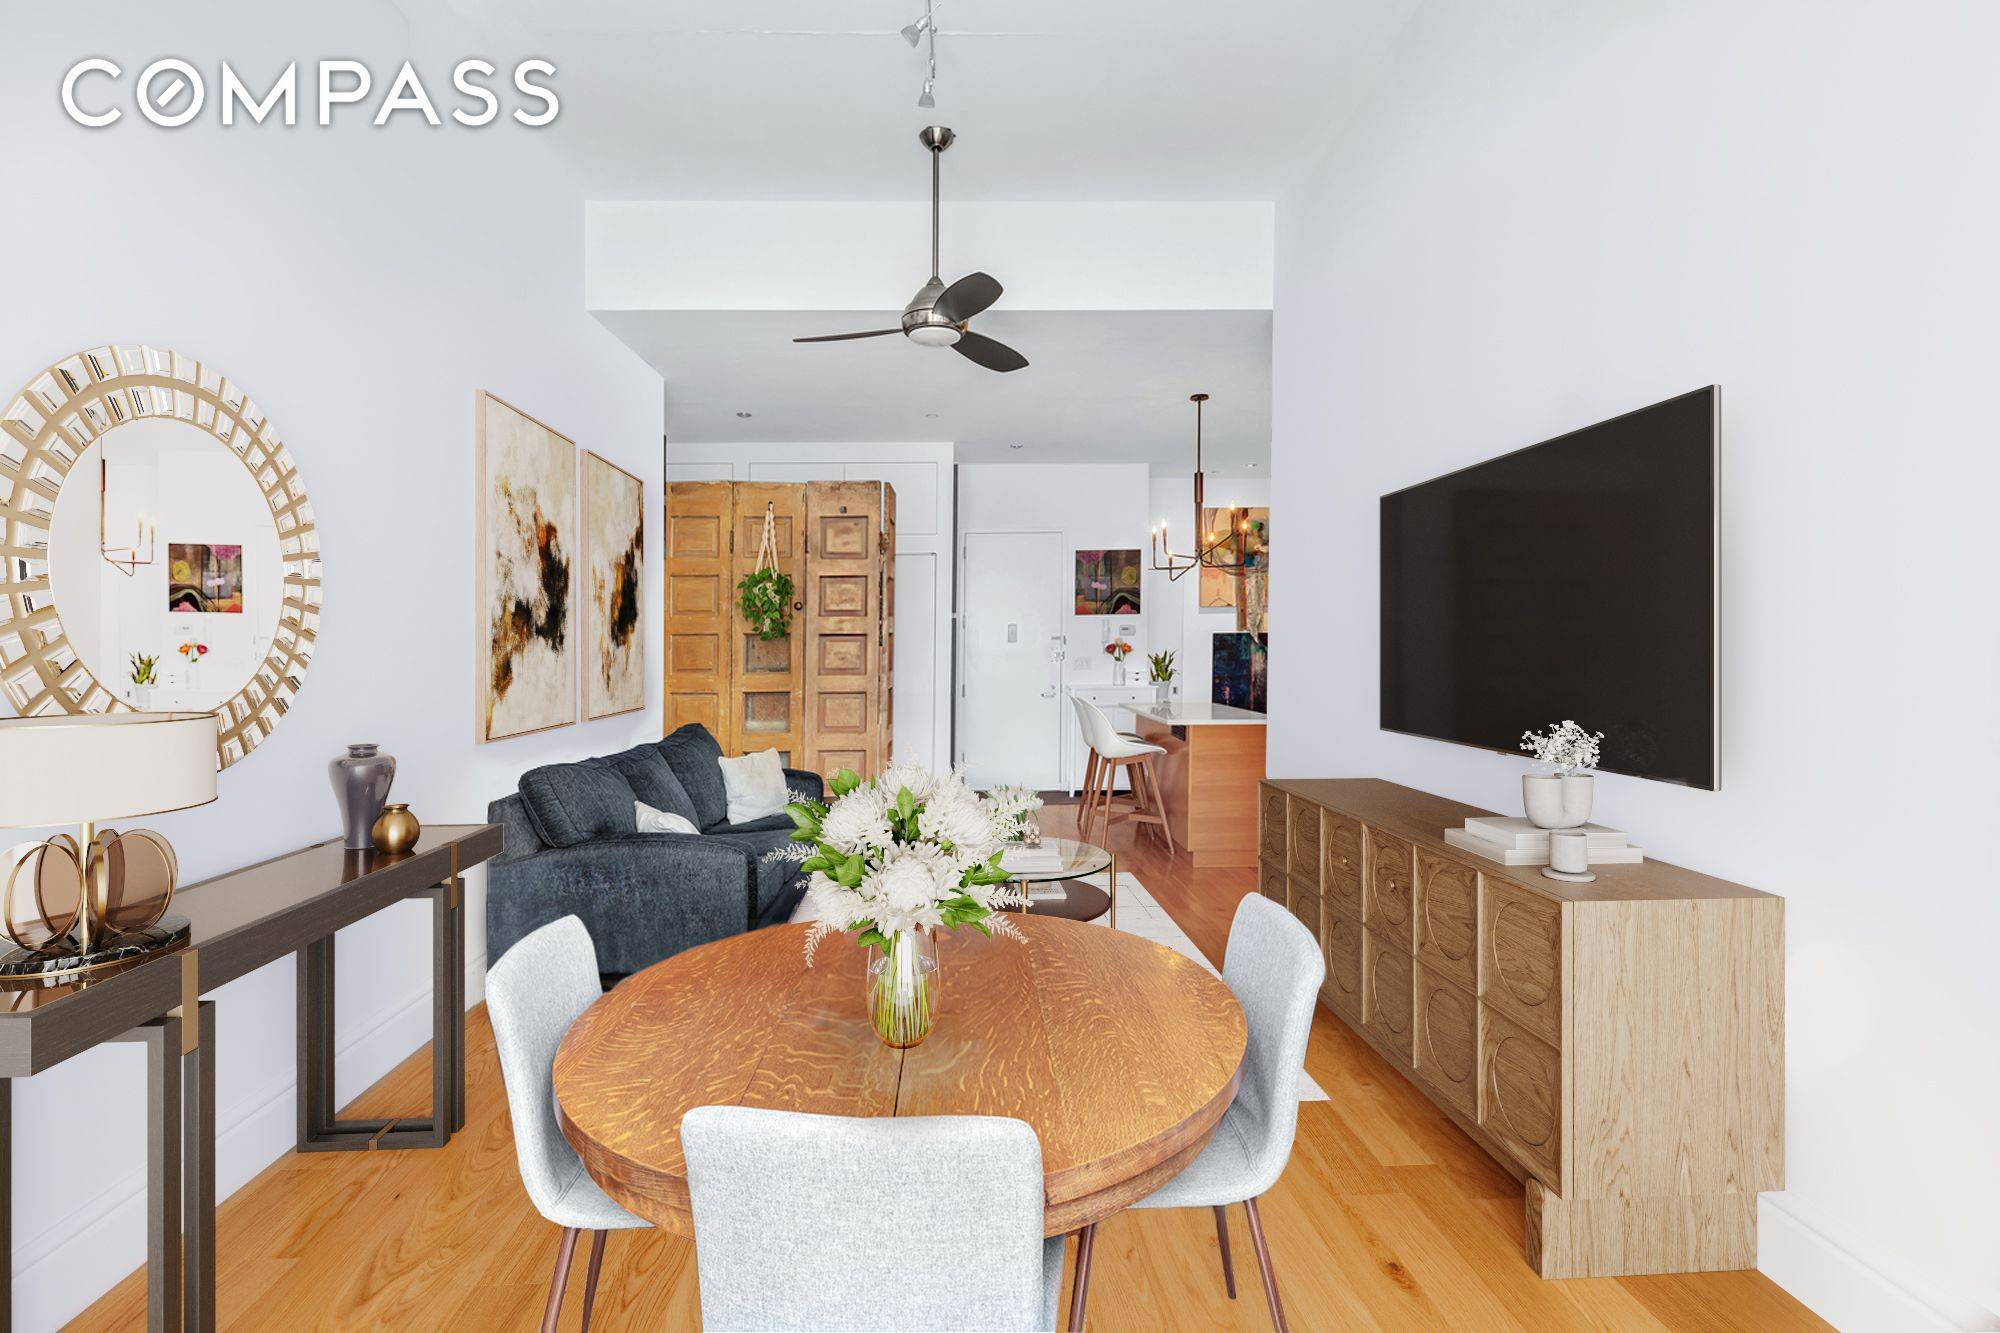 Williamsburg Historic Condo Jackson Foundry Lofts Beautiful 1BD 1BA with Private Balcony that has Freedom Tower views, Loft layout with Soaring 16 Ceilings, Open Kitchen with Integrated Stainless Steel appliances ...